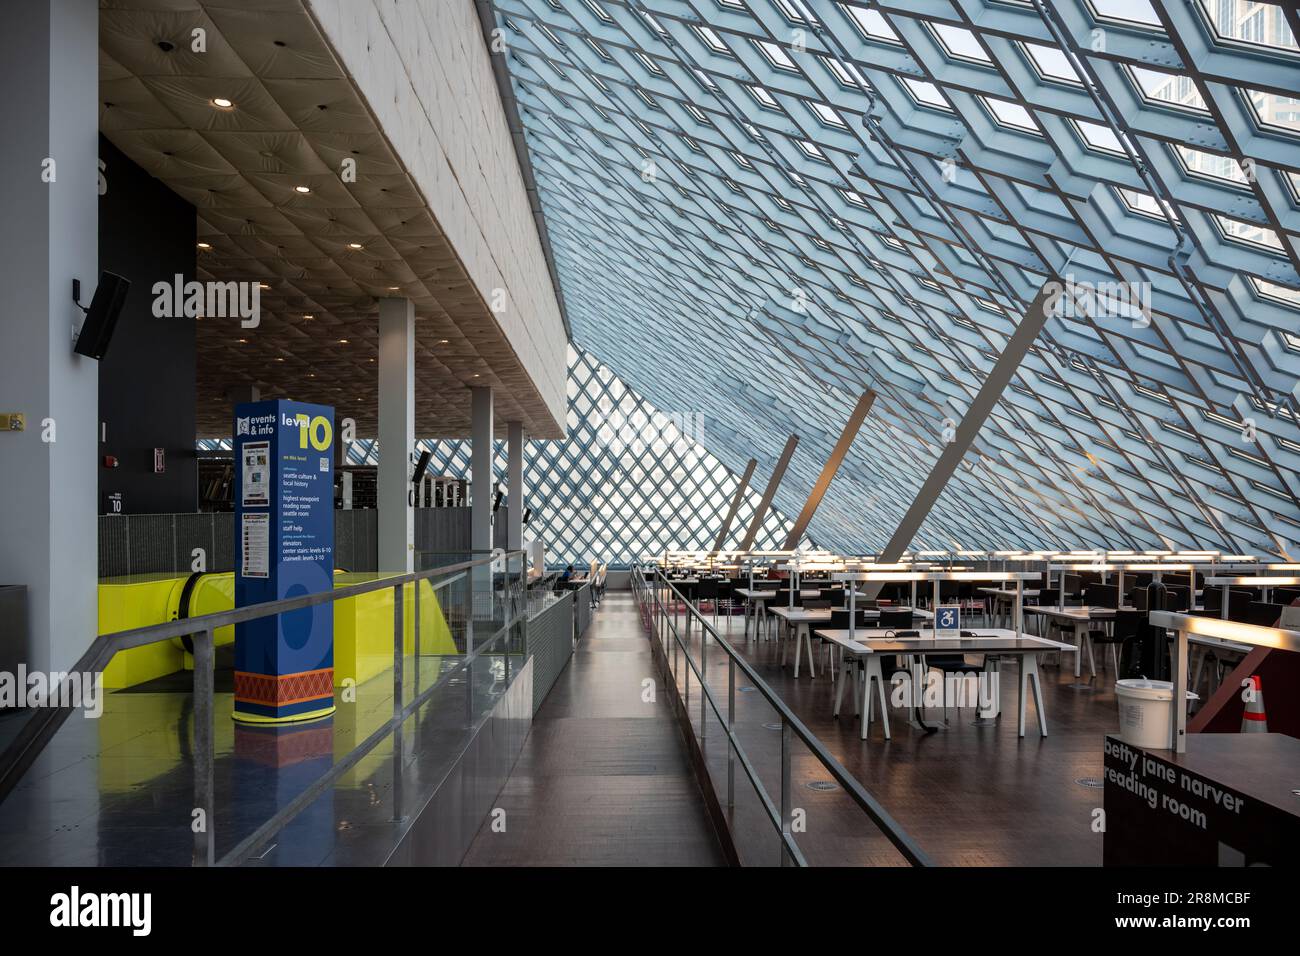 Seattle Central Library, designed by OMA Stock Photo